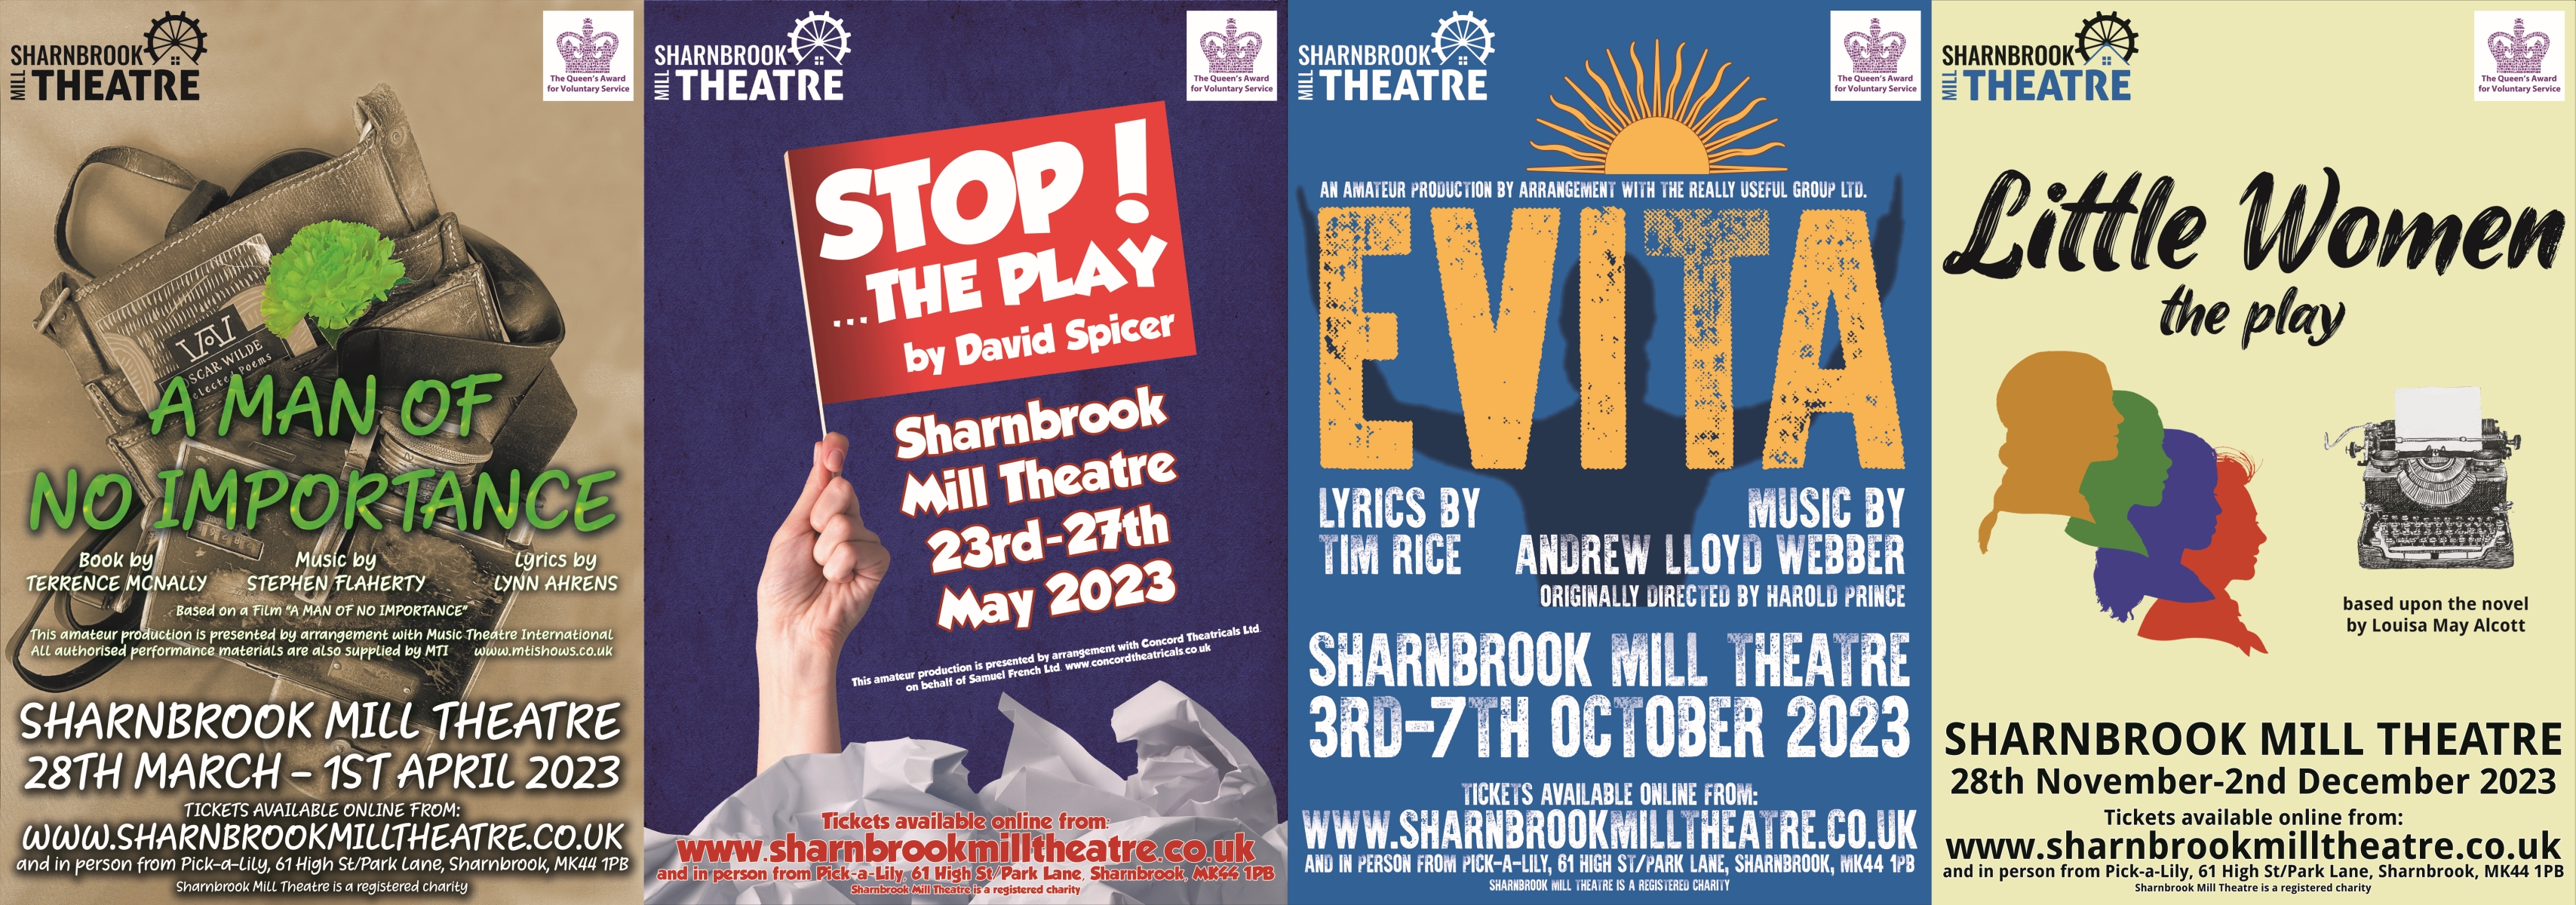 Our 2023 Season - A Man of No Importance, Stop! The Play, Evita and Little Women